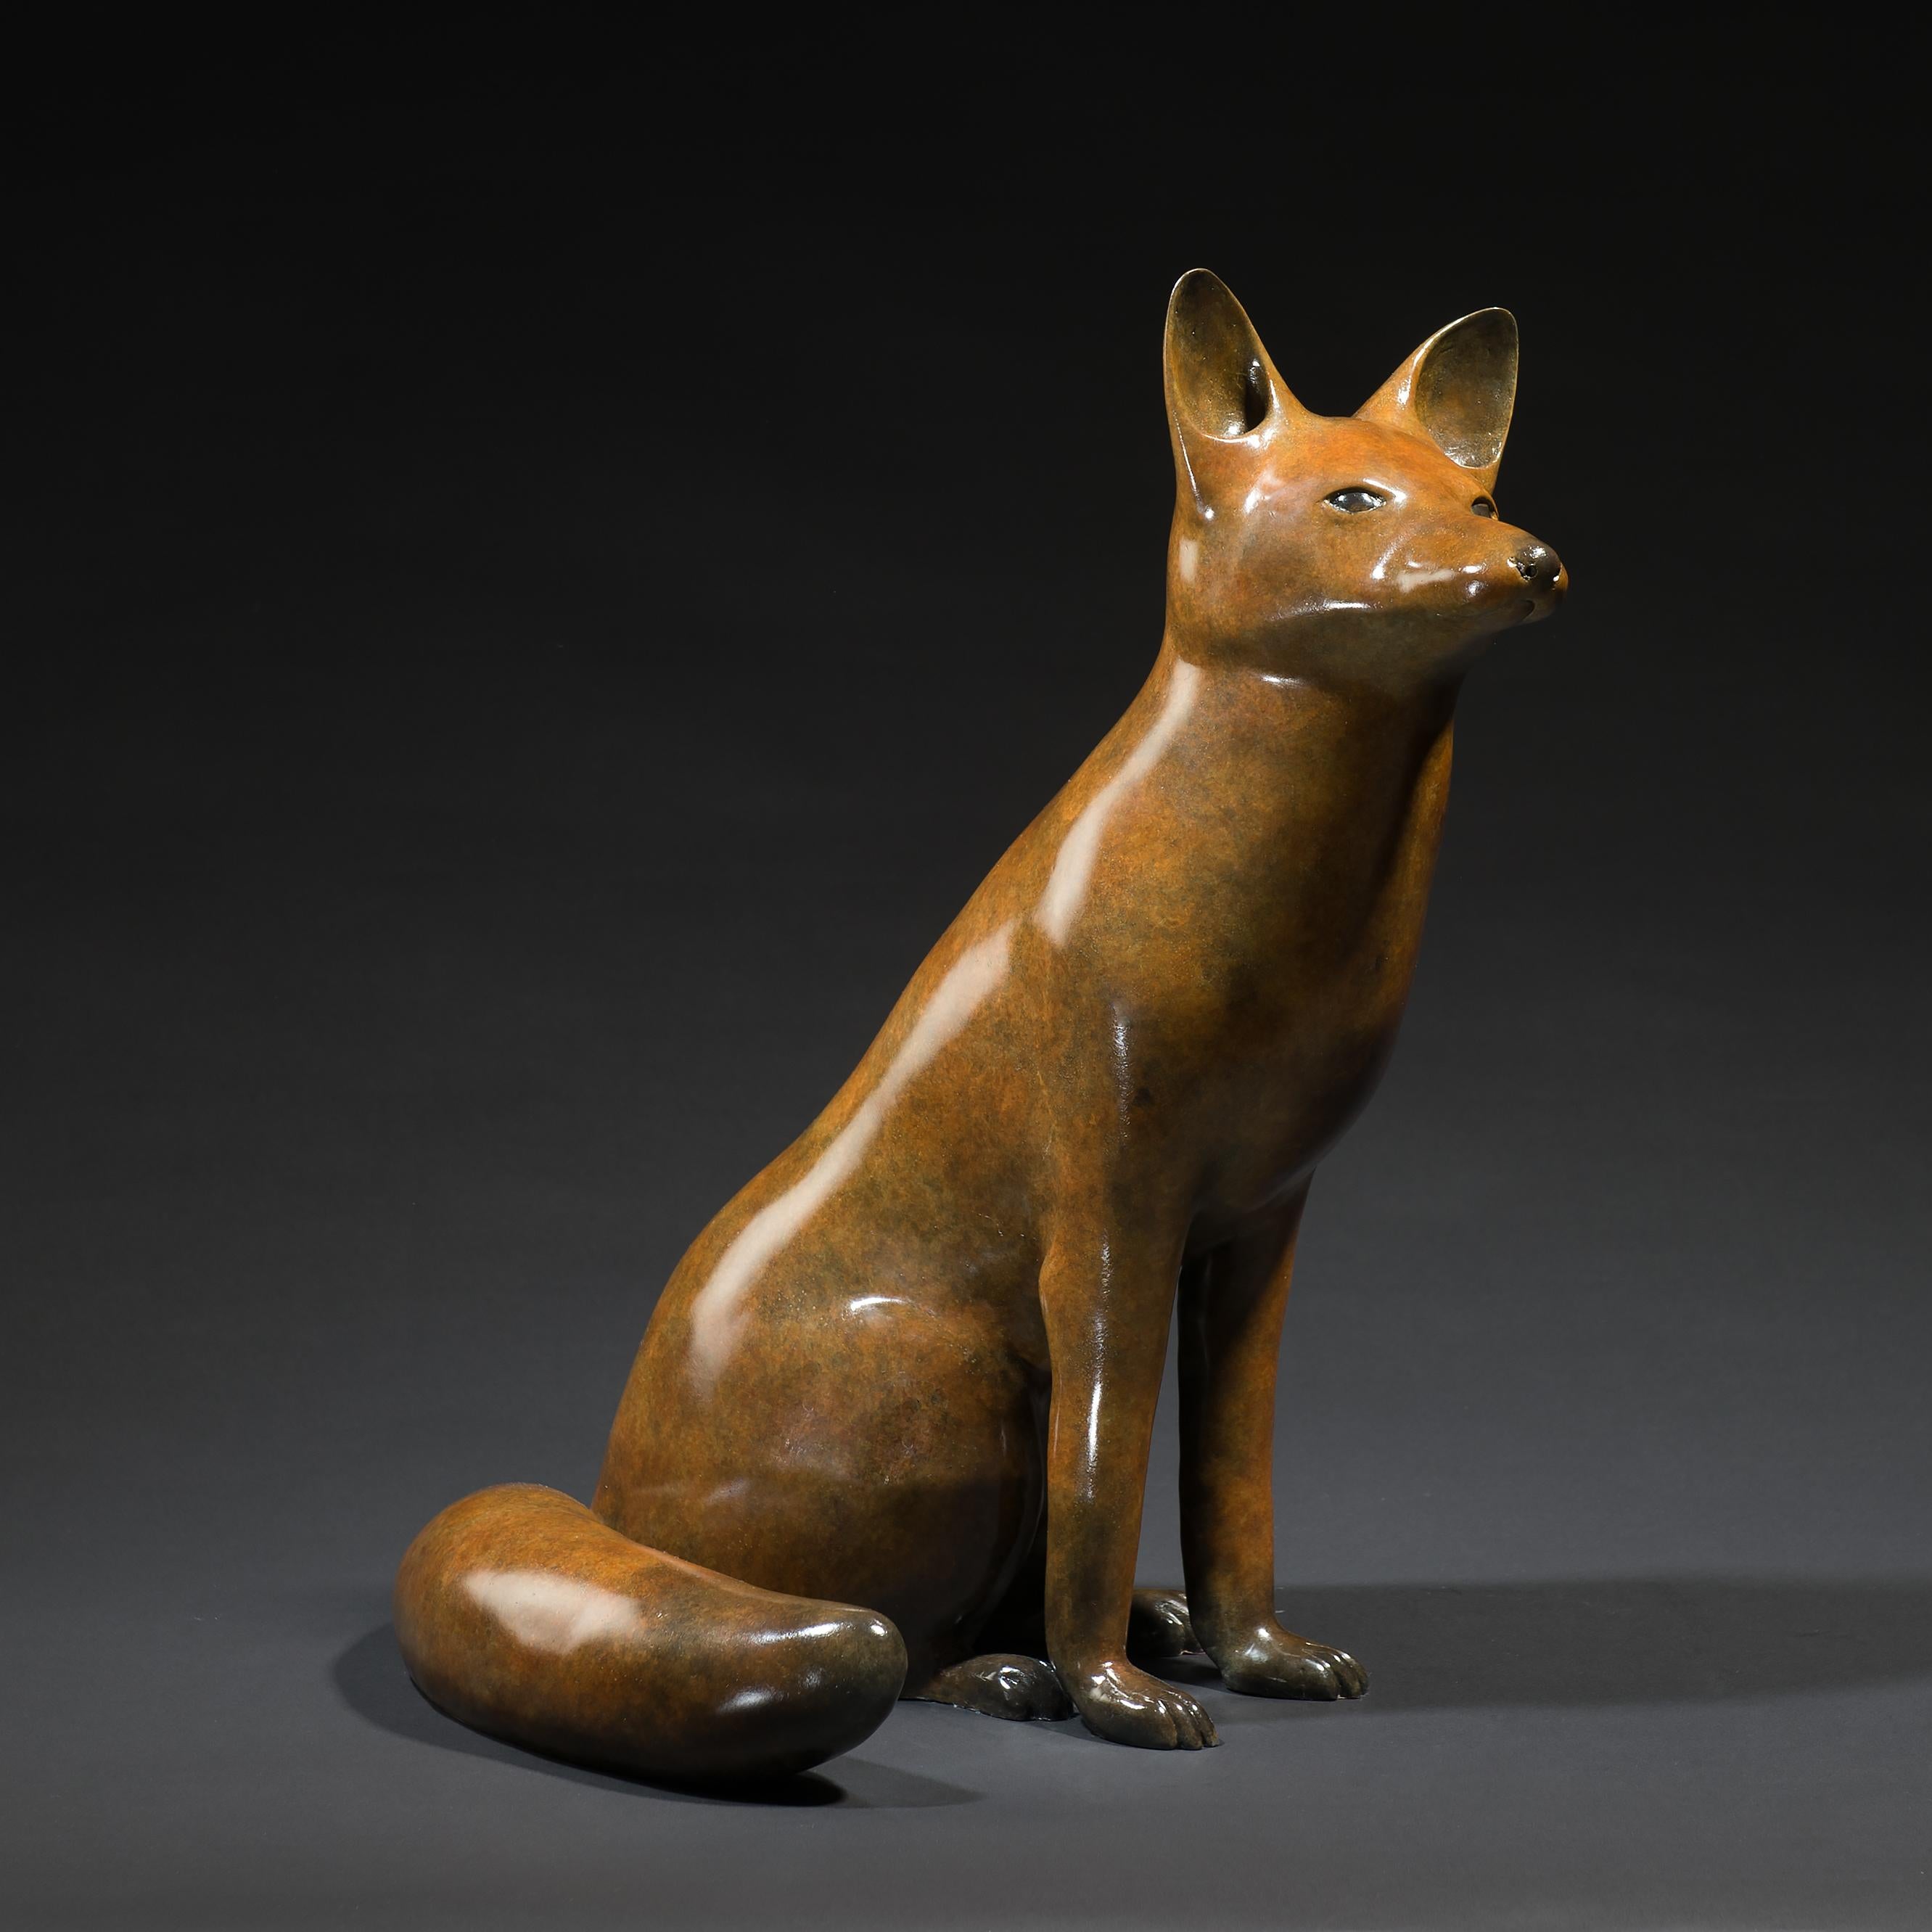 'Vixen' is an original Bronze sculpture with a stunning life like qualities. Being a life-size piece Smith has captured every last detail and given this wonderful sculpture life.


Richard Smith's ability to convey so much character with such simple